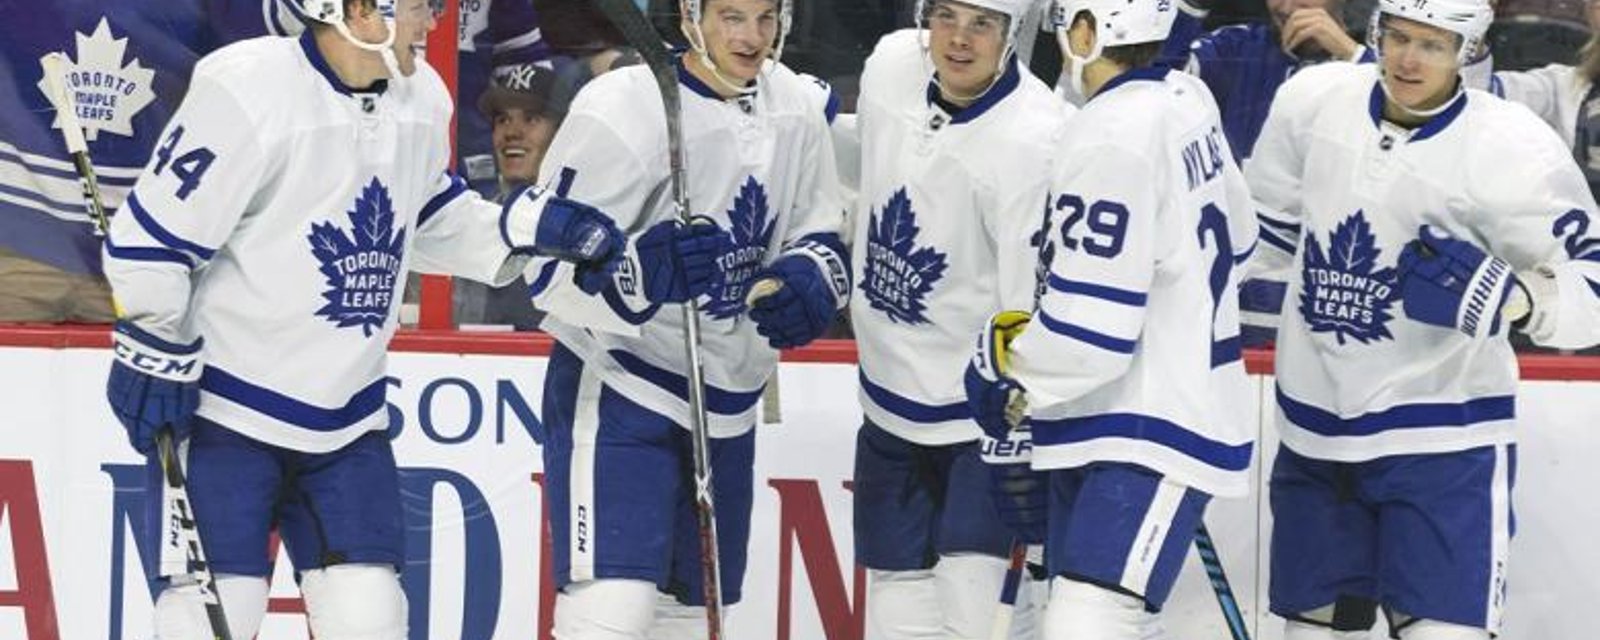 Undrafted player could crack Leafs lineup this year